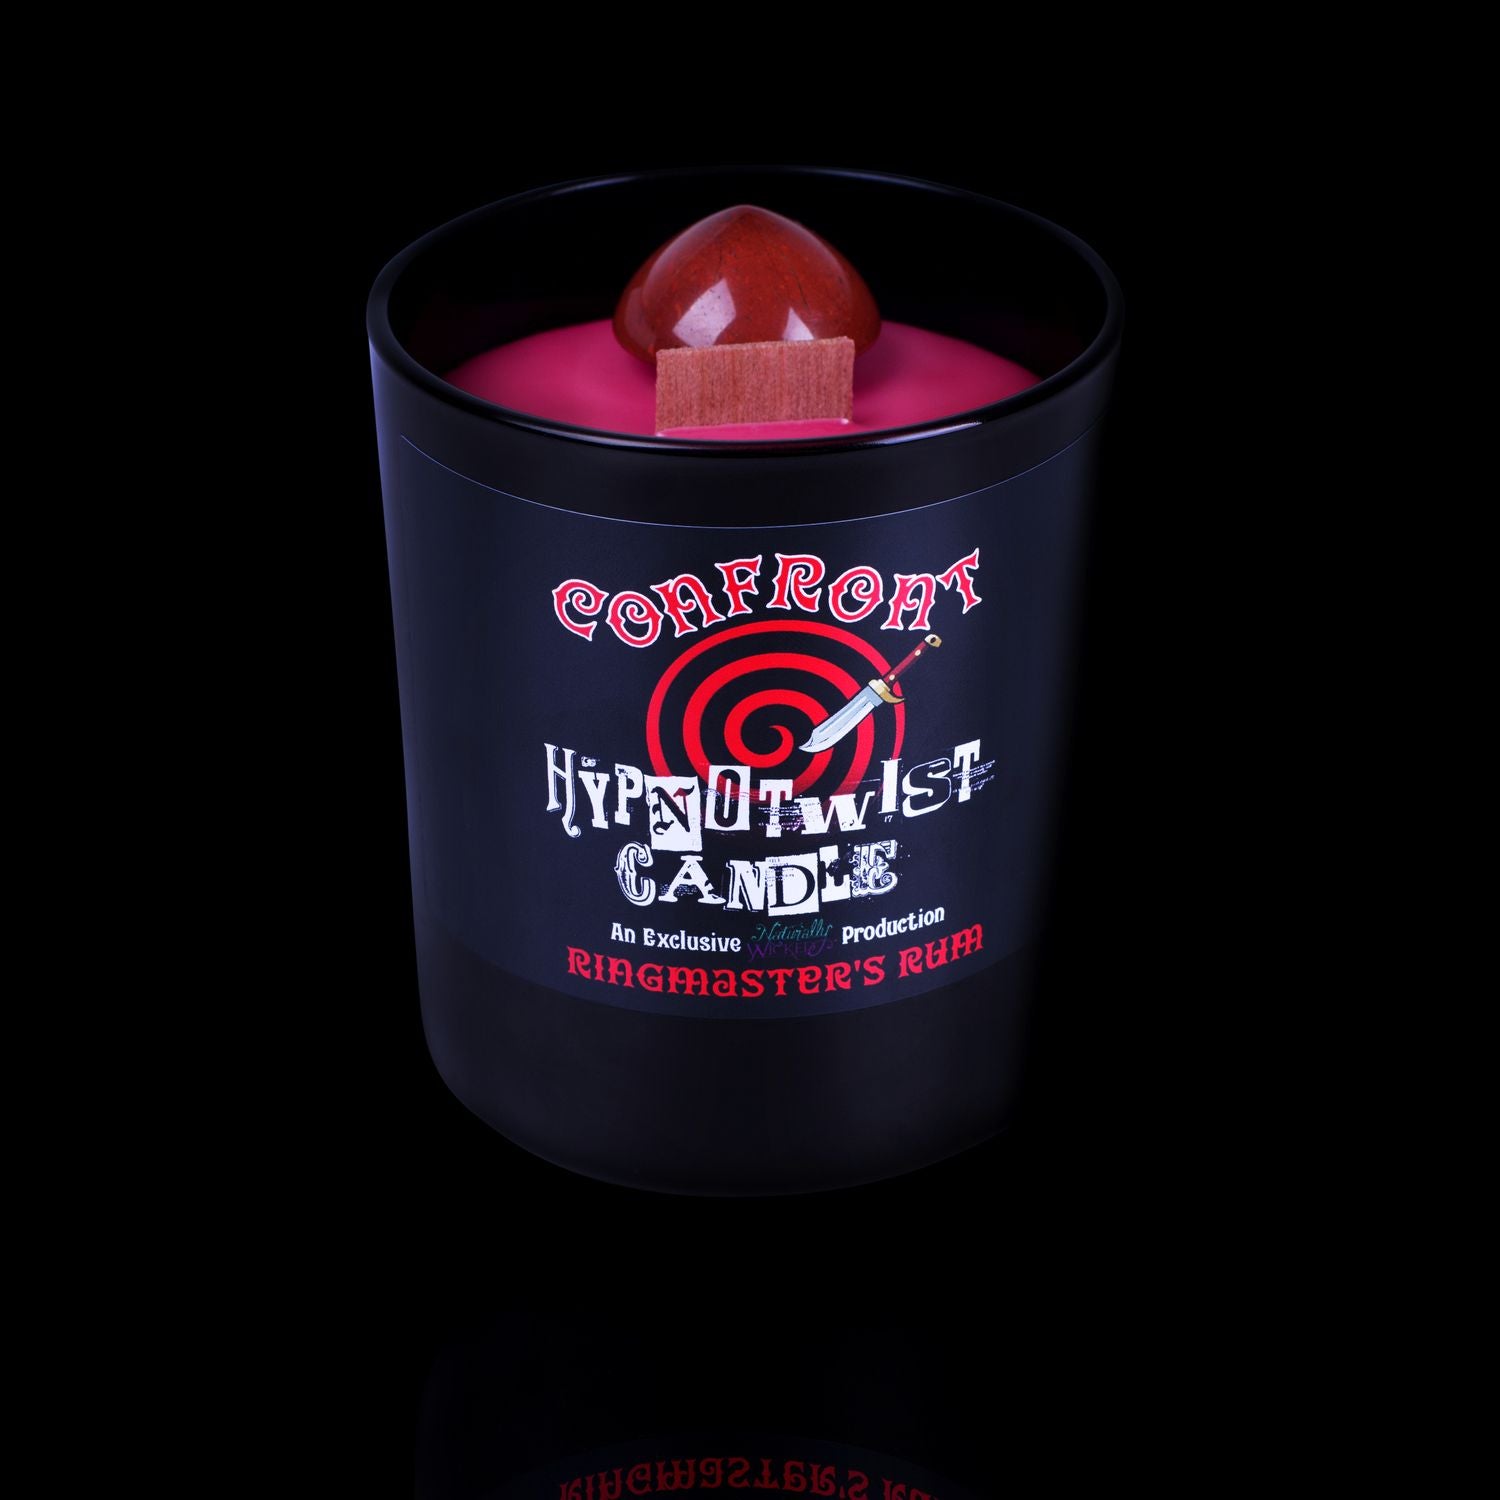 Naturally Wicked Hypnotwist Confront Candle Featuring Plant-based Soy Red Wax Scented with Ringmaster's Rum & Includes A Red Jasper Crystal Spinning Top.